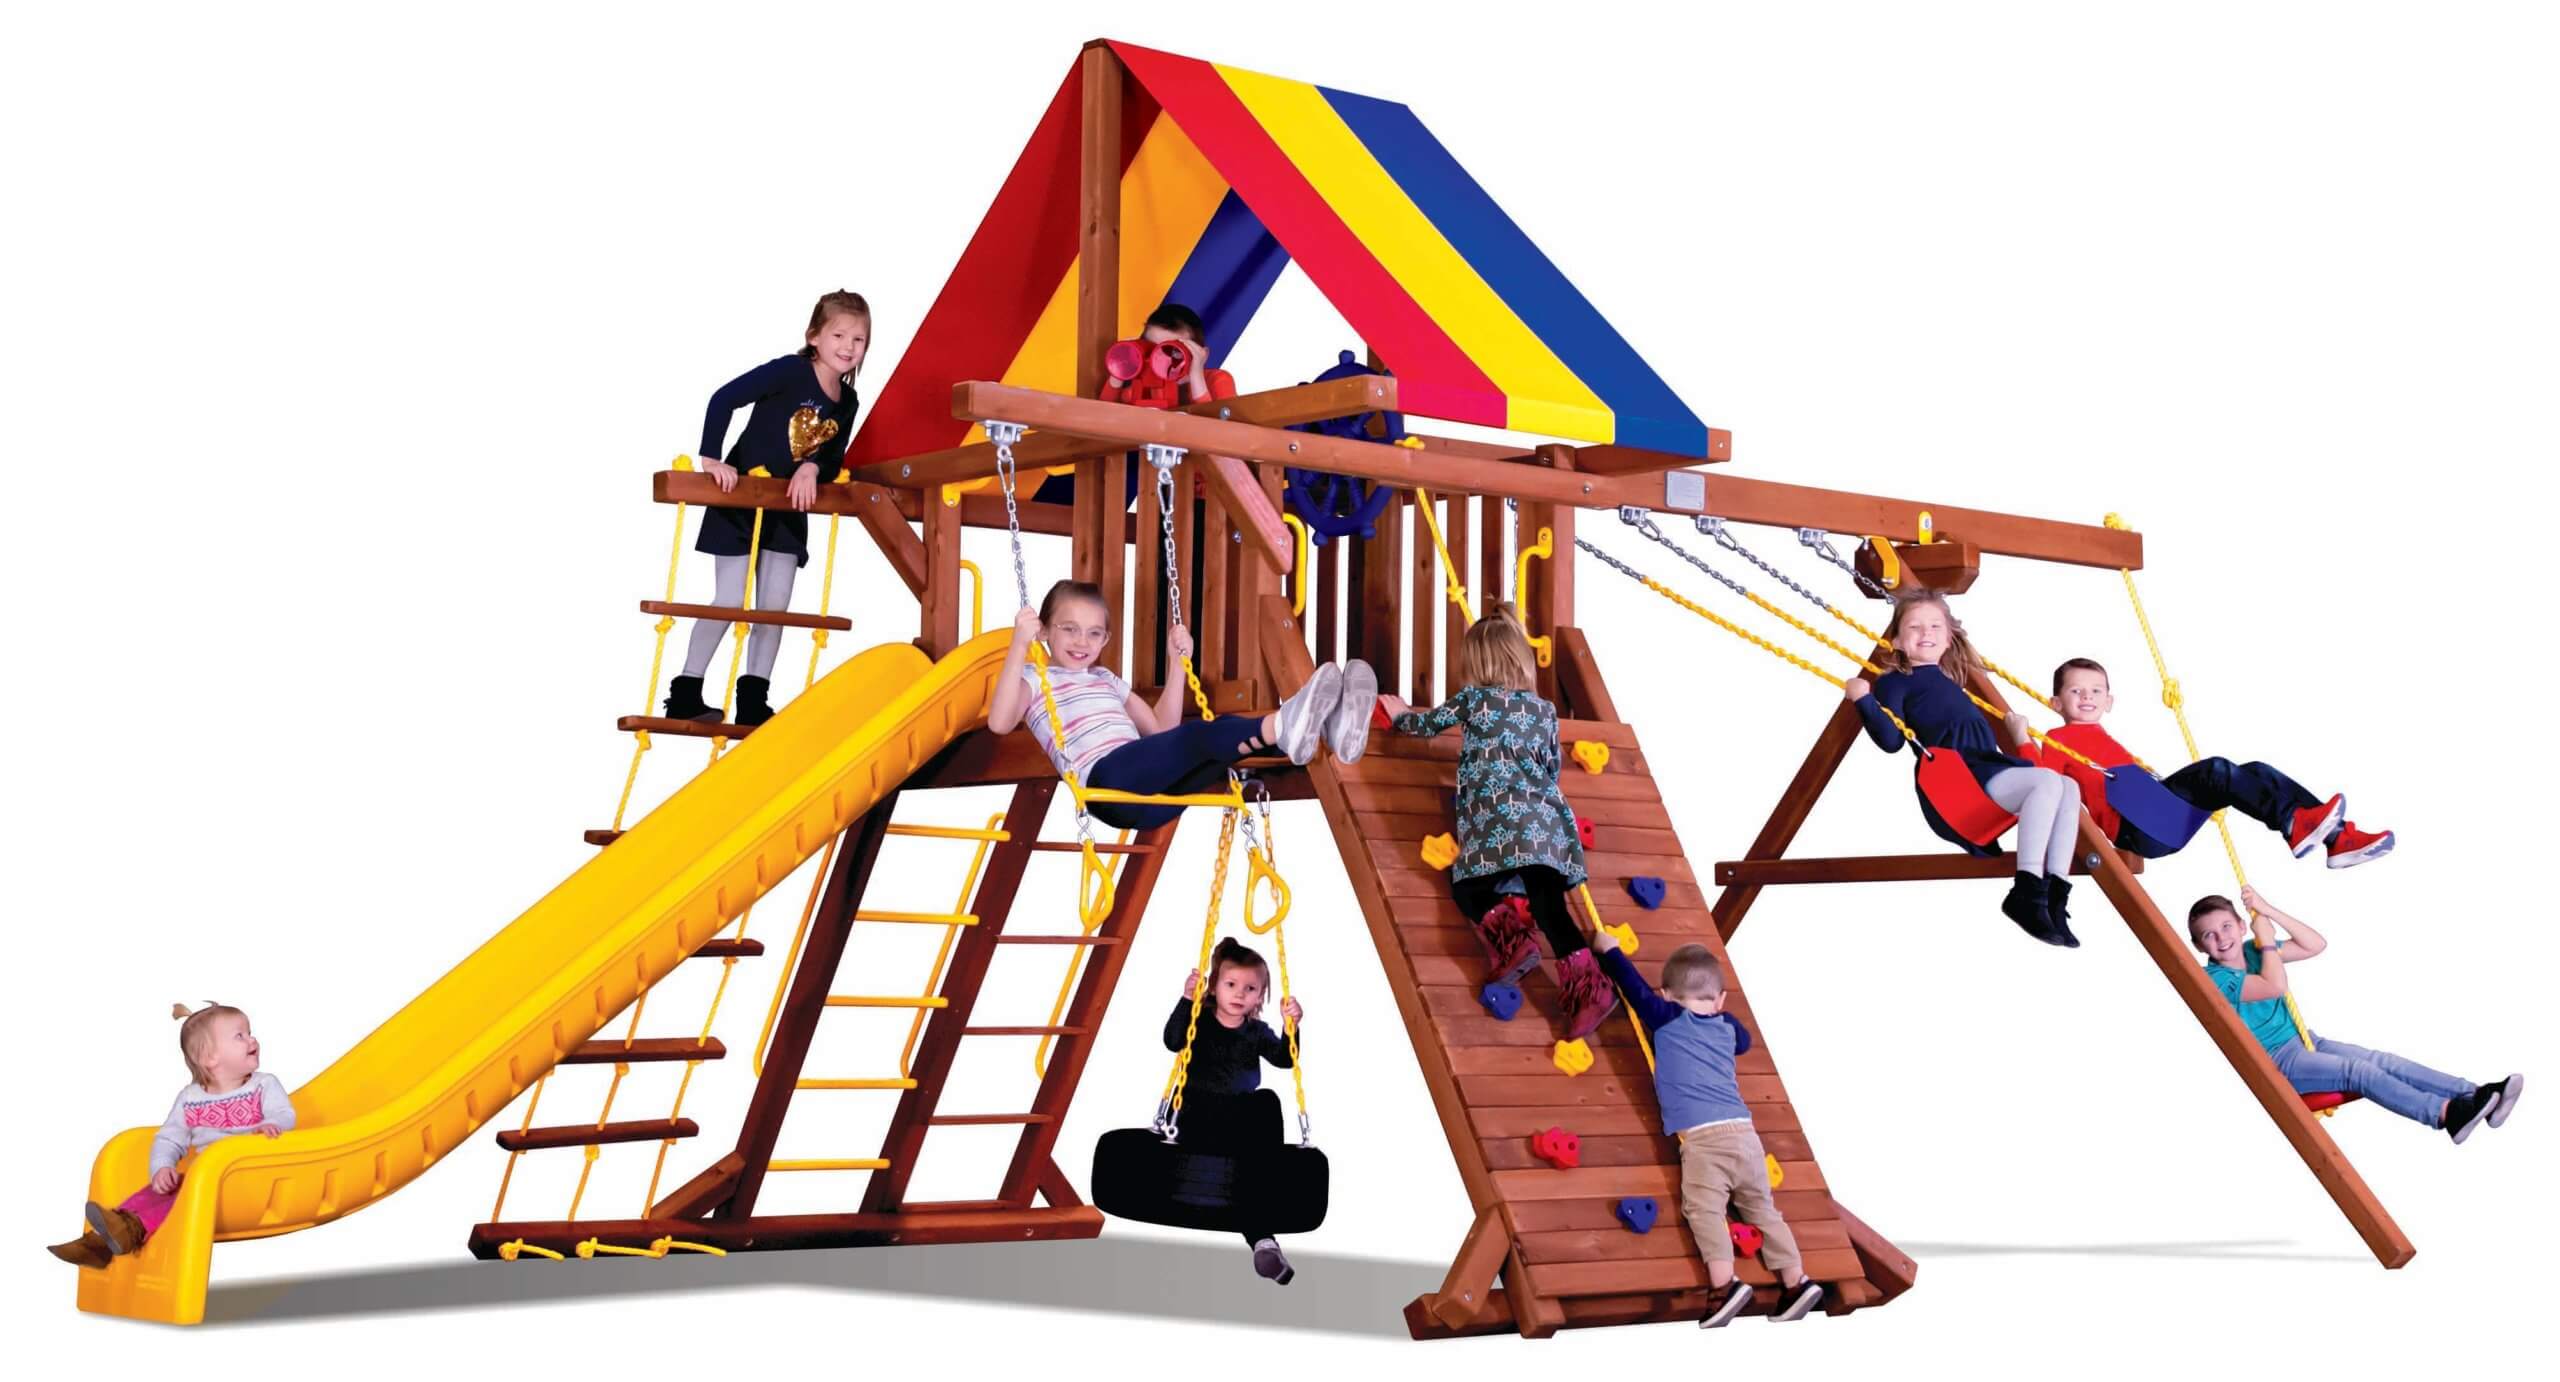 Circus Castle Pkg II Feature Model (8A) - Rainbow Play Systems of Texas